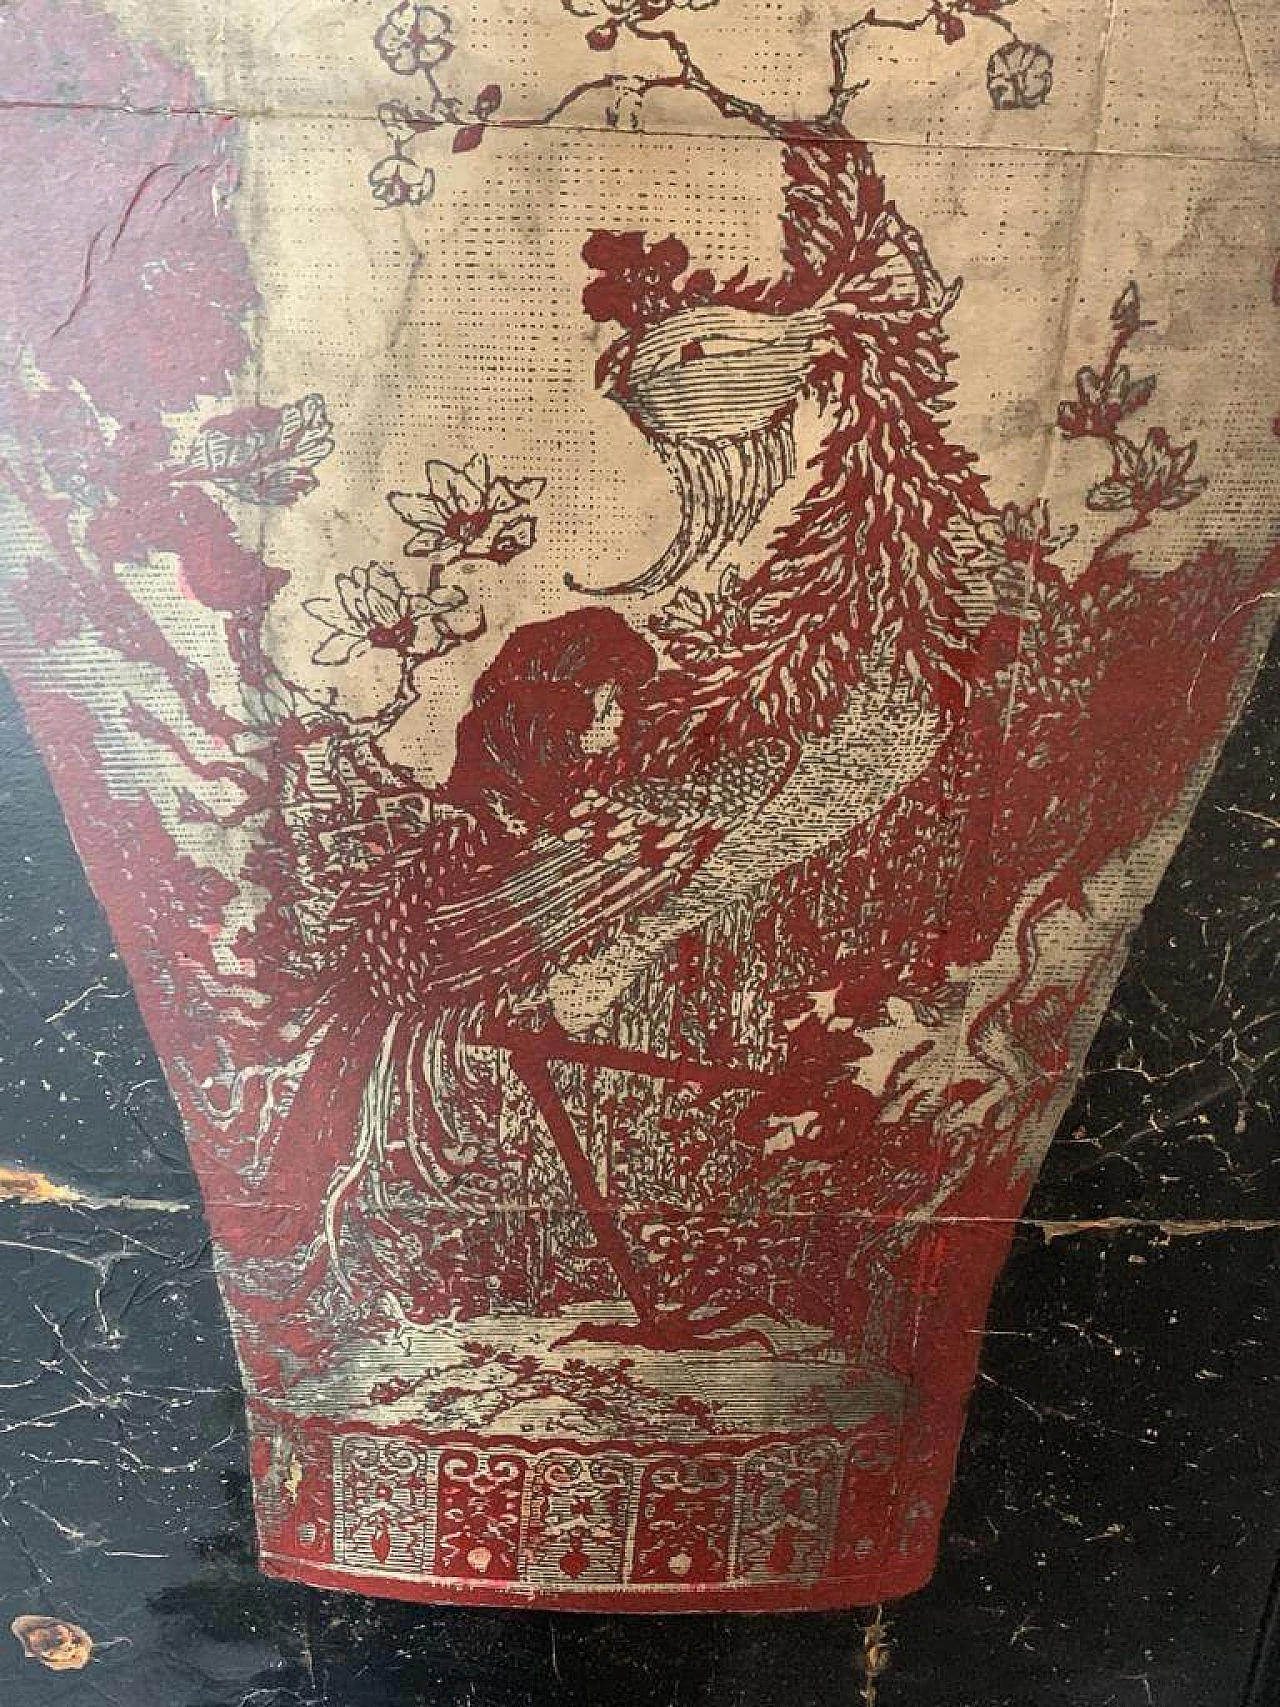 Painted silkscreen on rice paper depicting a vase with lid, 1960s 5